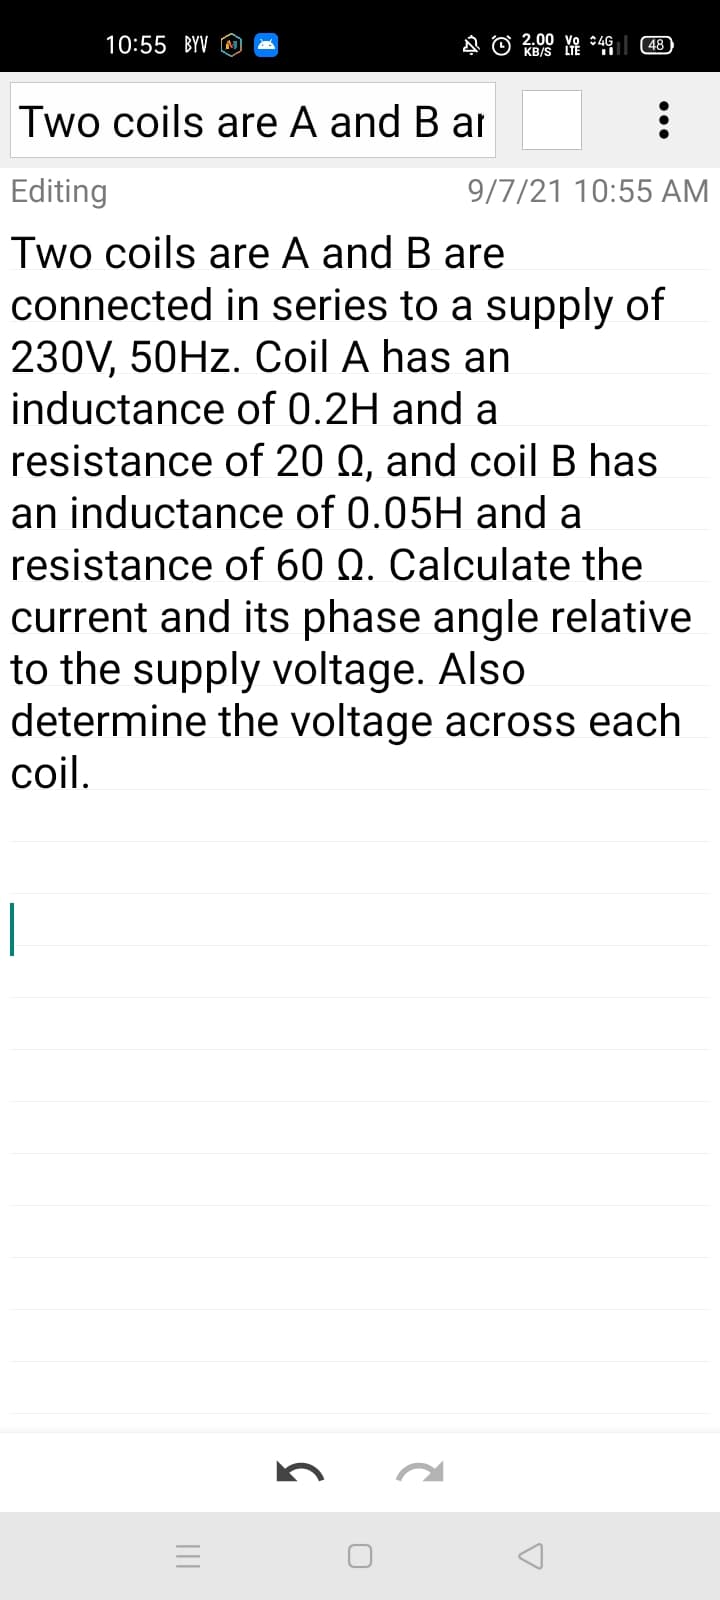 10:55 BYV
2.00 Yo 49
(48)
KB/S
Two coils are A and B ar :
Editing
9/7/21 10:55 AM
Two coils are A and B are
connected in series to a supply of
230V, 50HZ. Coil A has an
inductance of 0.2H and a
resistance of 20 Q, and coil B has
an inductance of 0.05H and a
resistance of 60 Q. Calculate the
current and its phase angle relative
to the supply voltage. Also
determine the voltage across each
coil.
|
